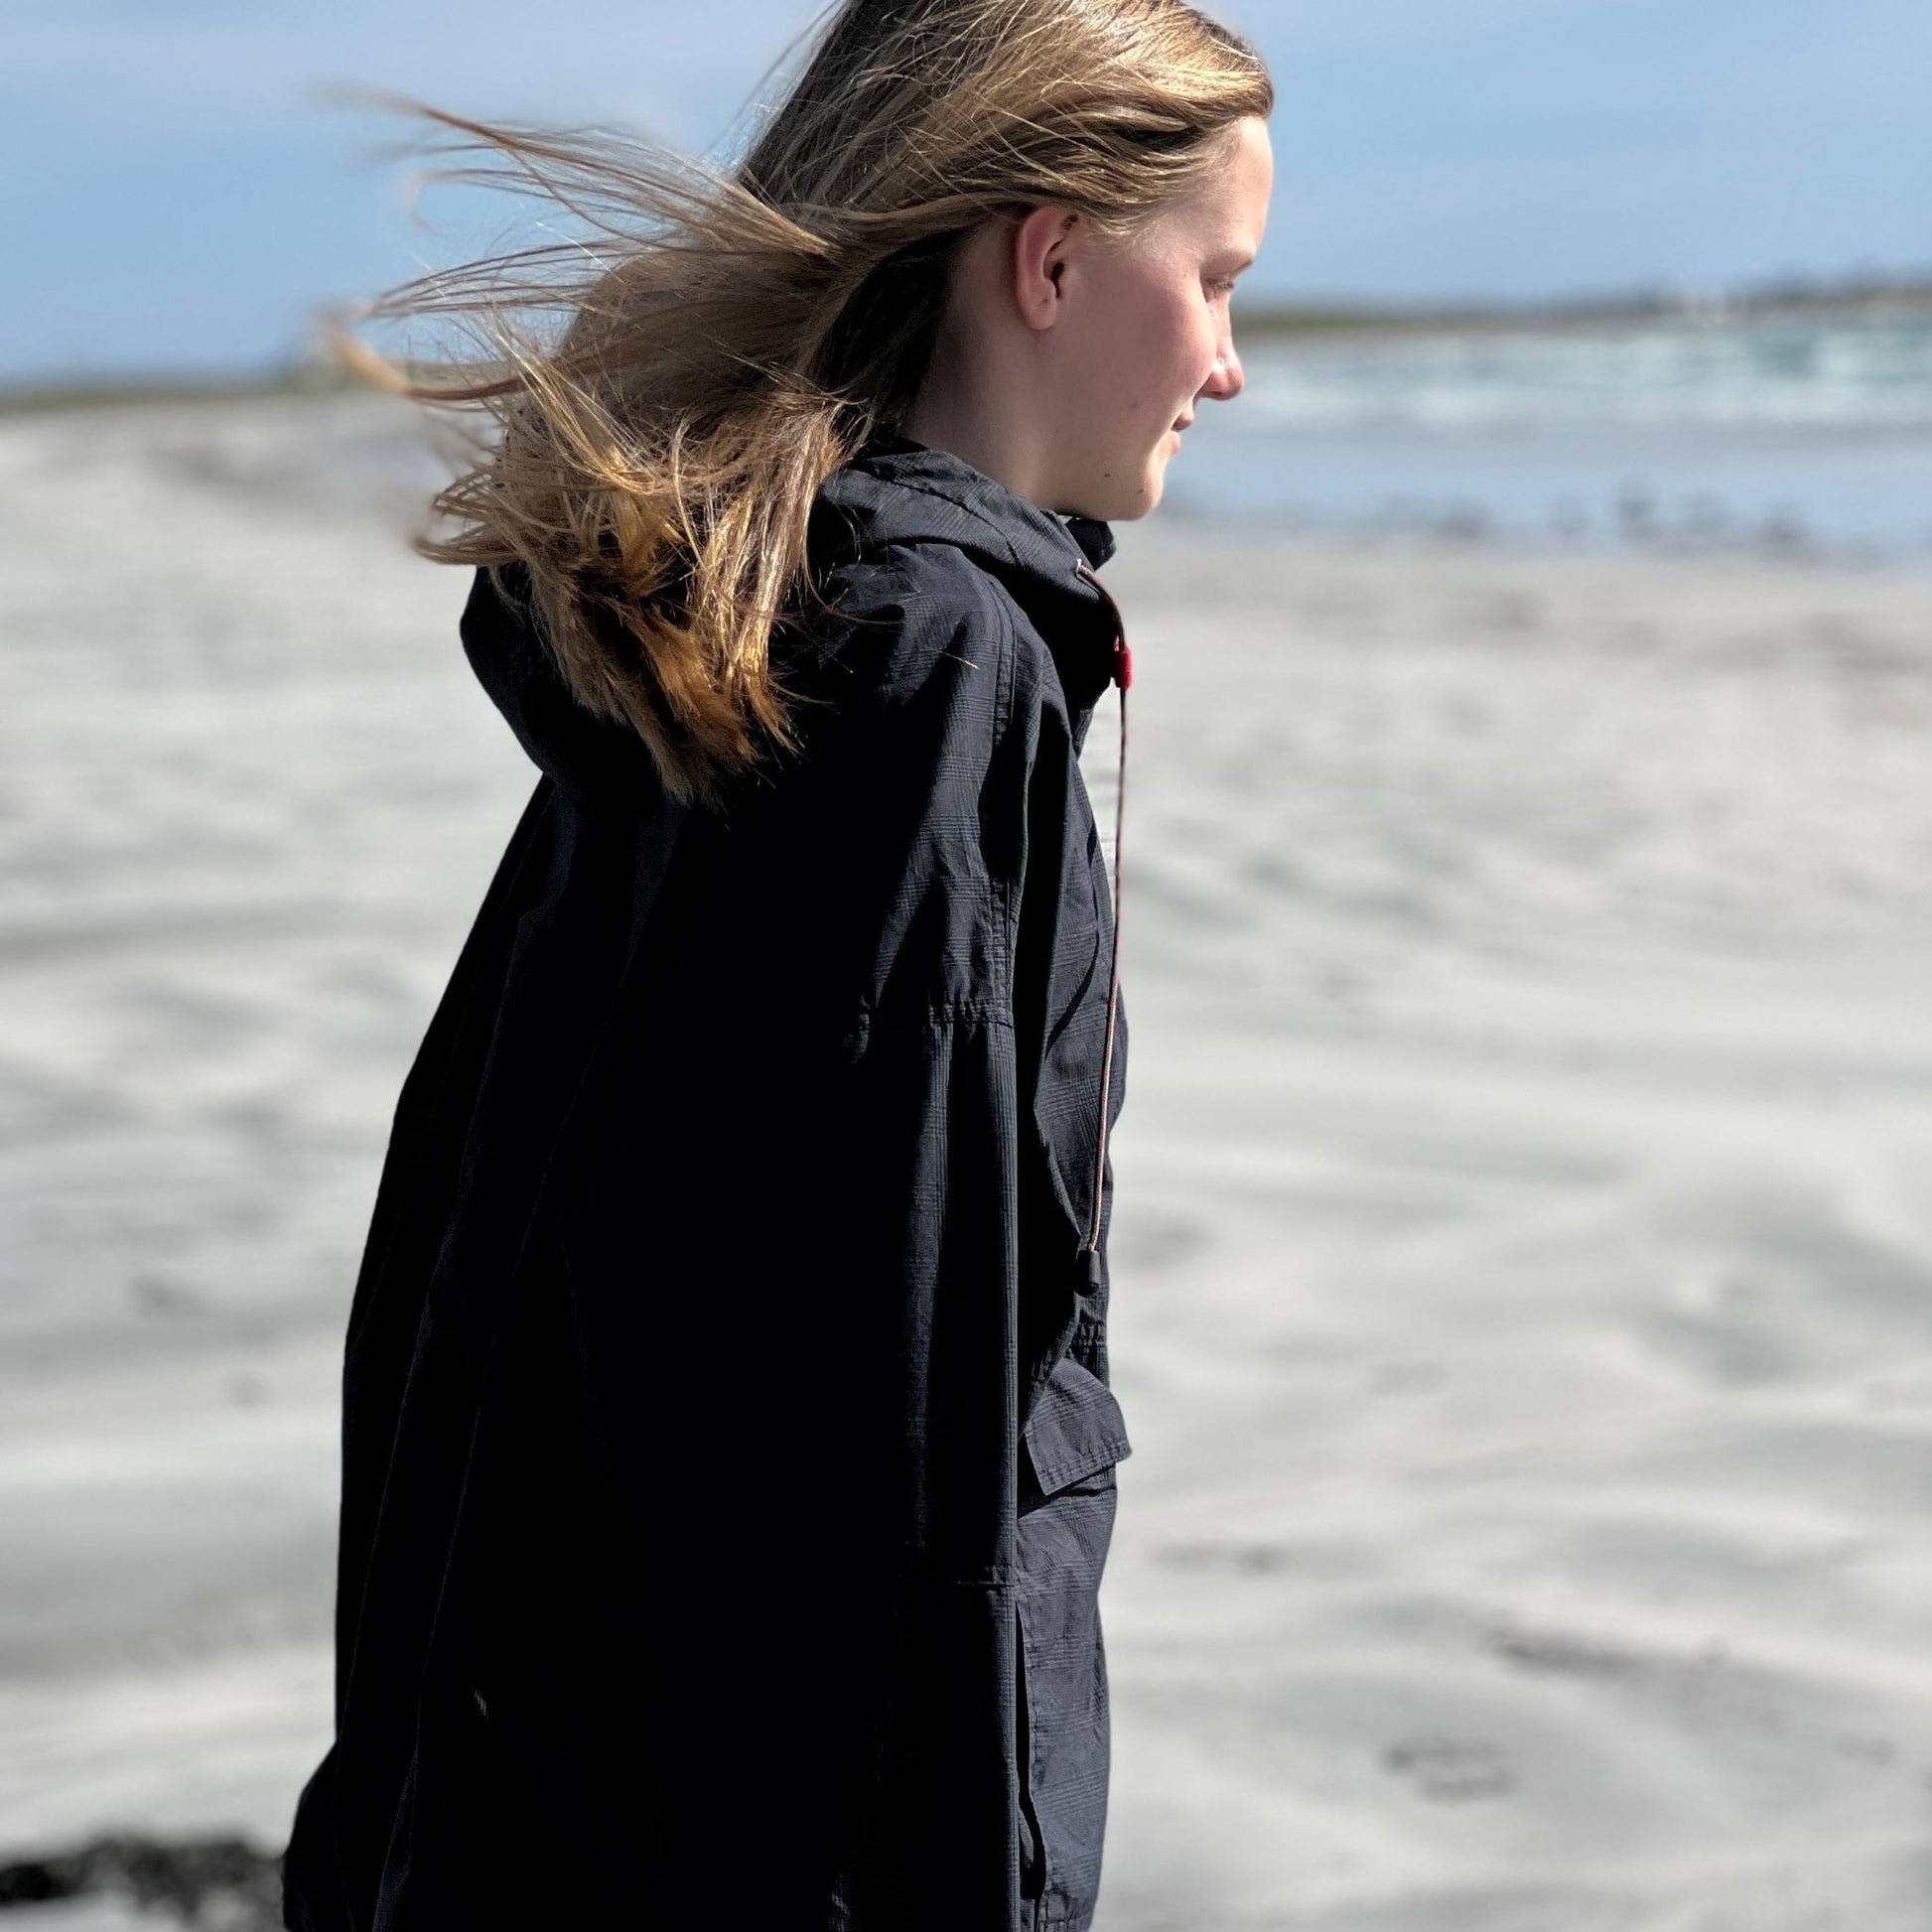 The Treshnish Windsmock is made from a lightweight 100% Organic Cotton made by Halley Stevensons of Dundee.  The colour here is Vulkan blue.  This coat is windproof and  showerproof but not waterproof in heavy rain.